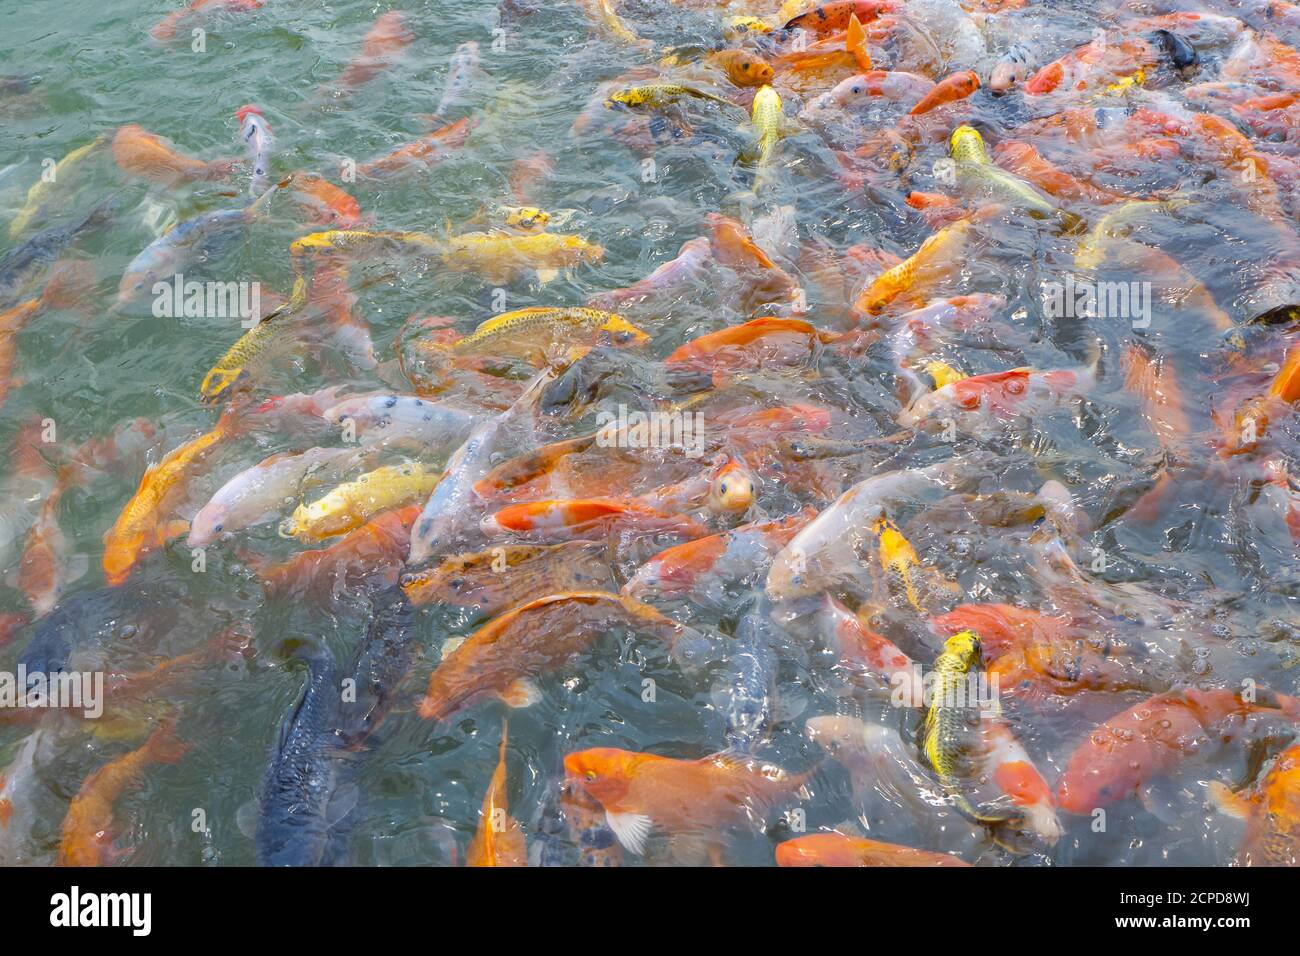 Tilapia and Koi fish or fancy carp fish swimming waiting for food in the pond. Stock Photo